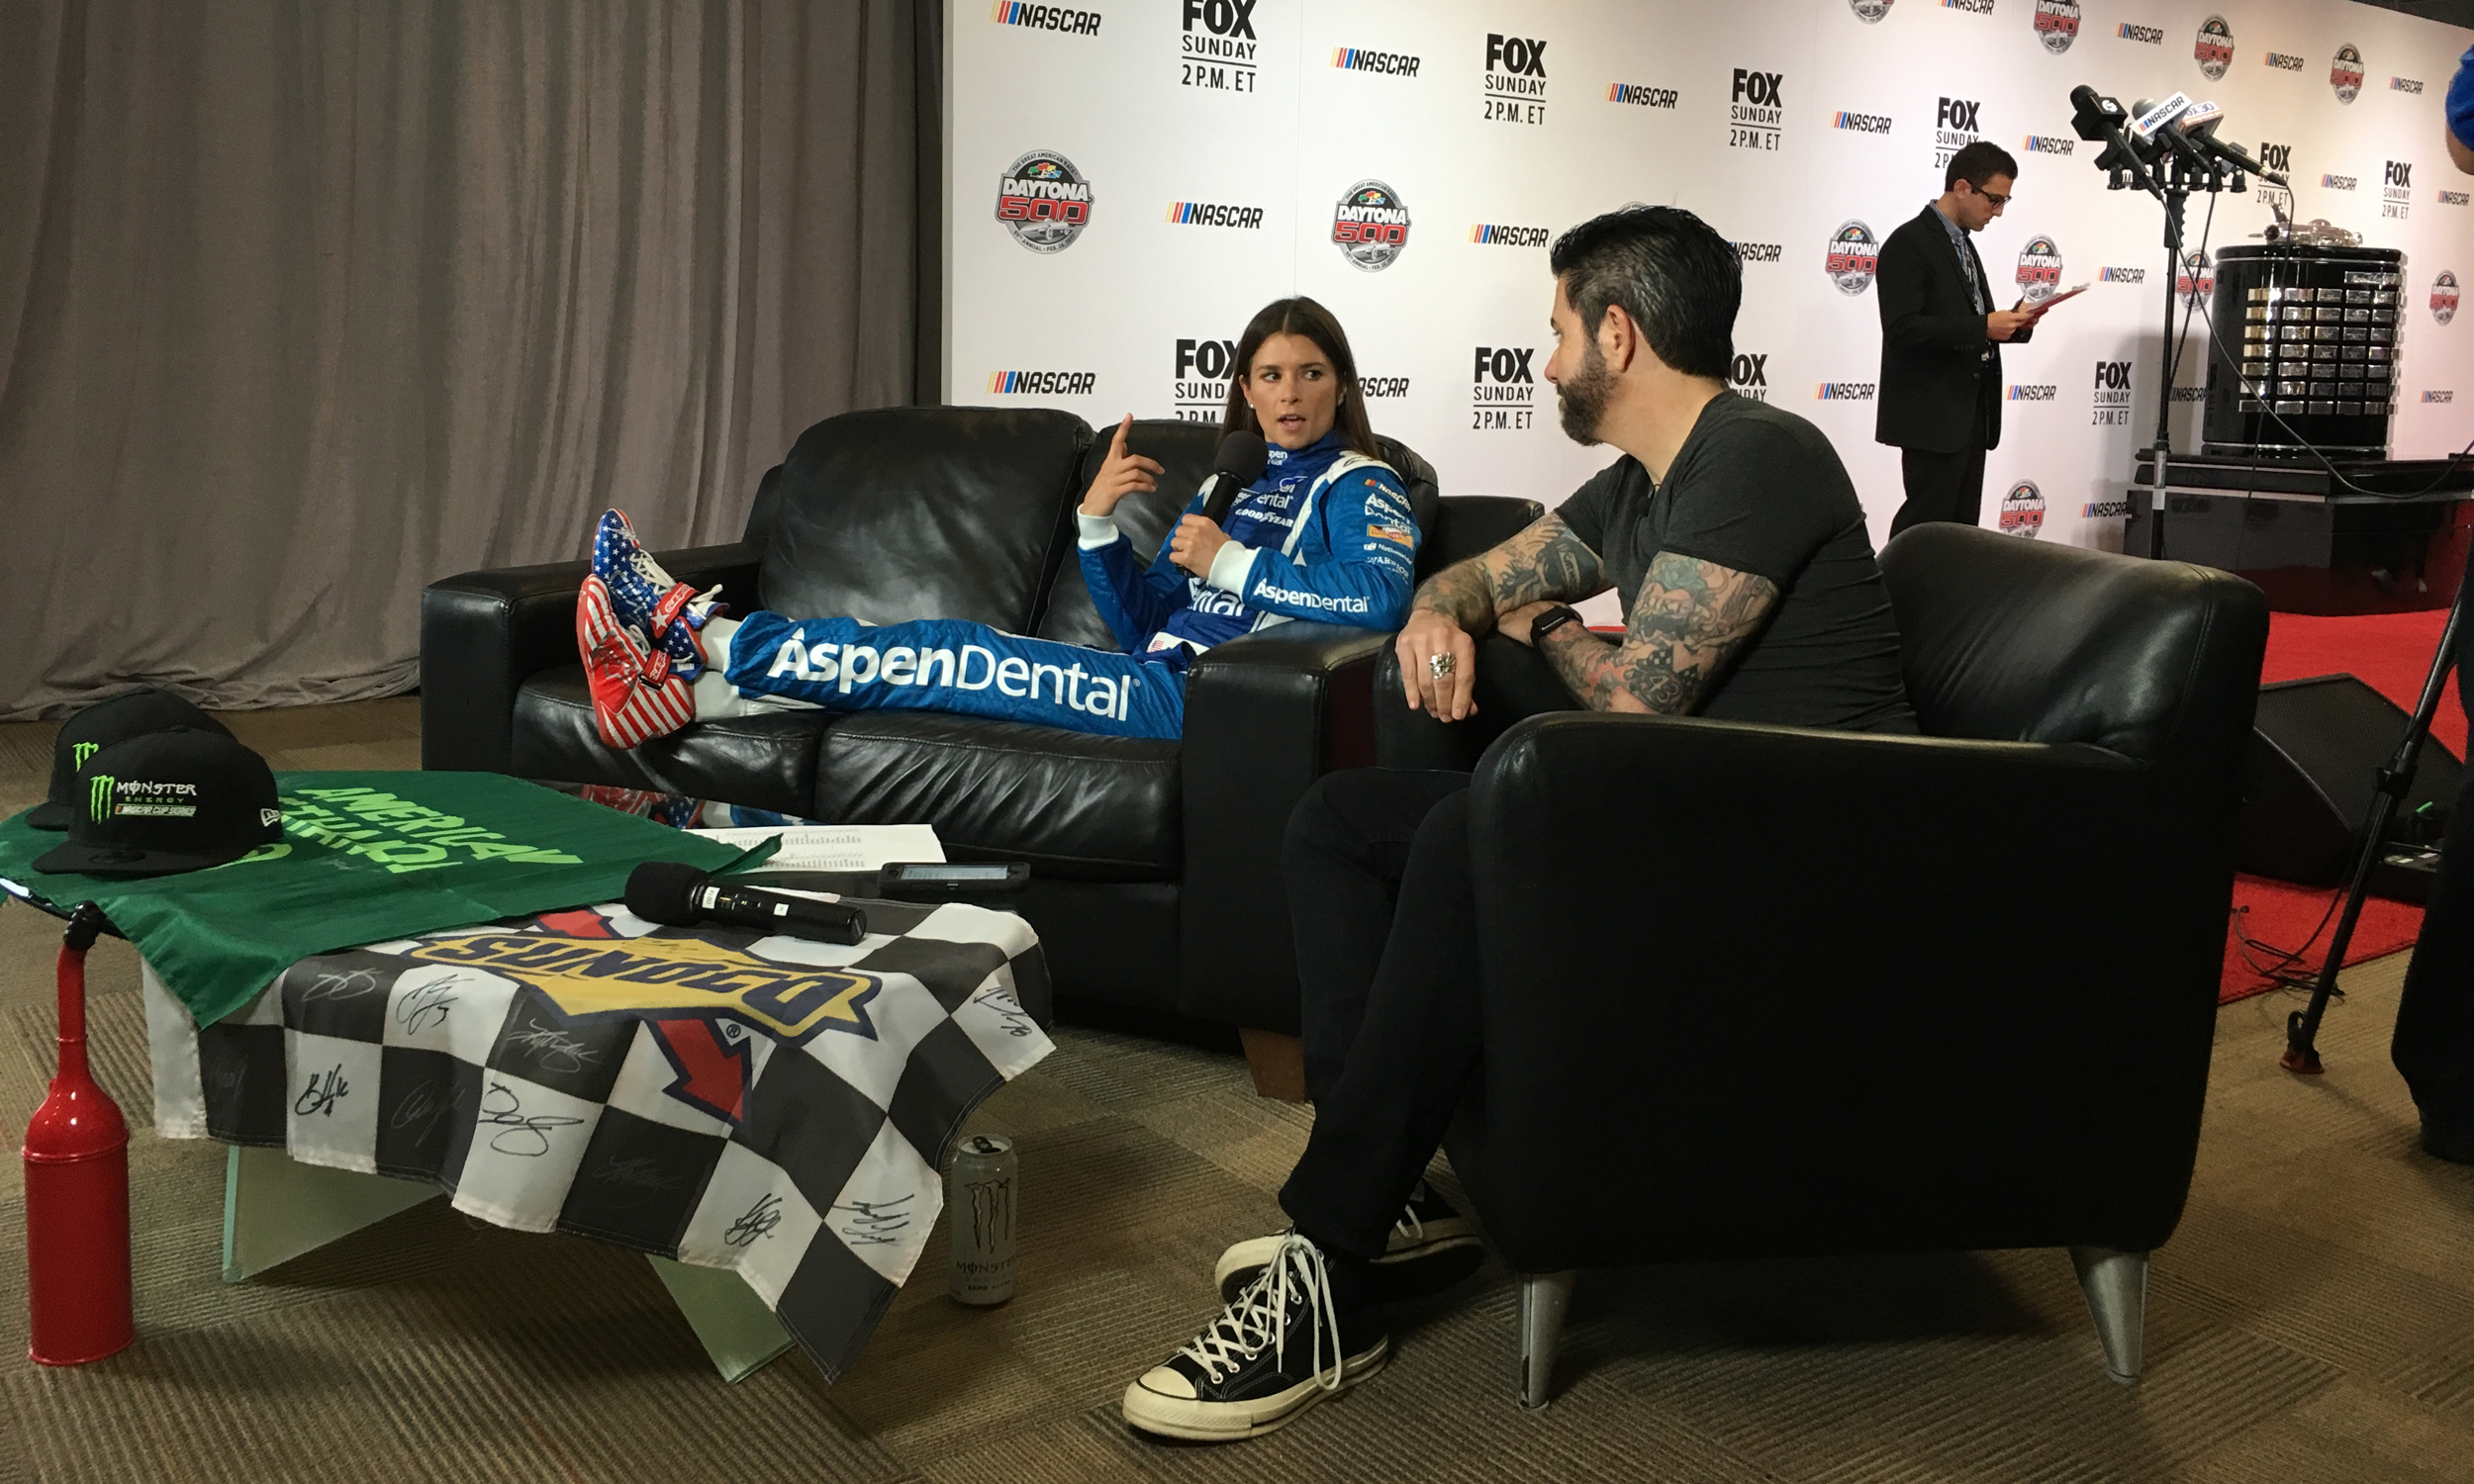 Danika Patrick (left) was one of more than 40 drivers that appeared on the Facebook Live shows that were streamed as a part of Daytona 500 Media Day.